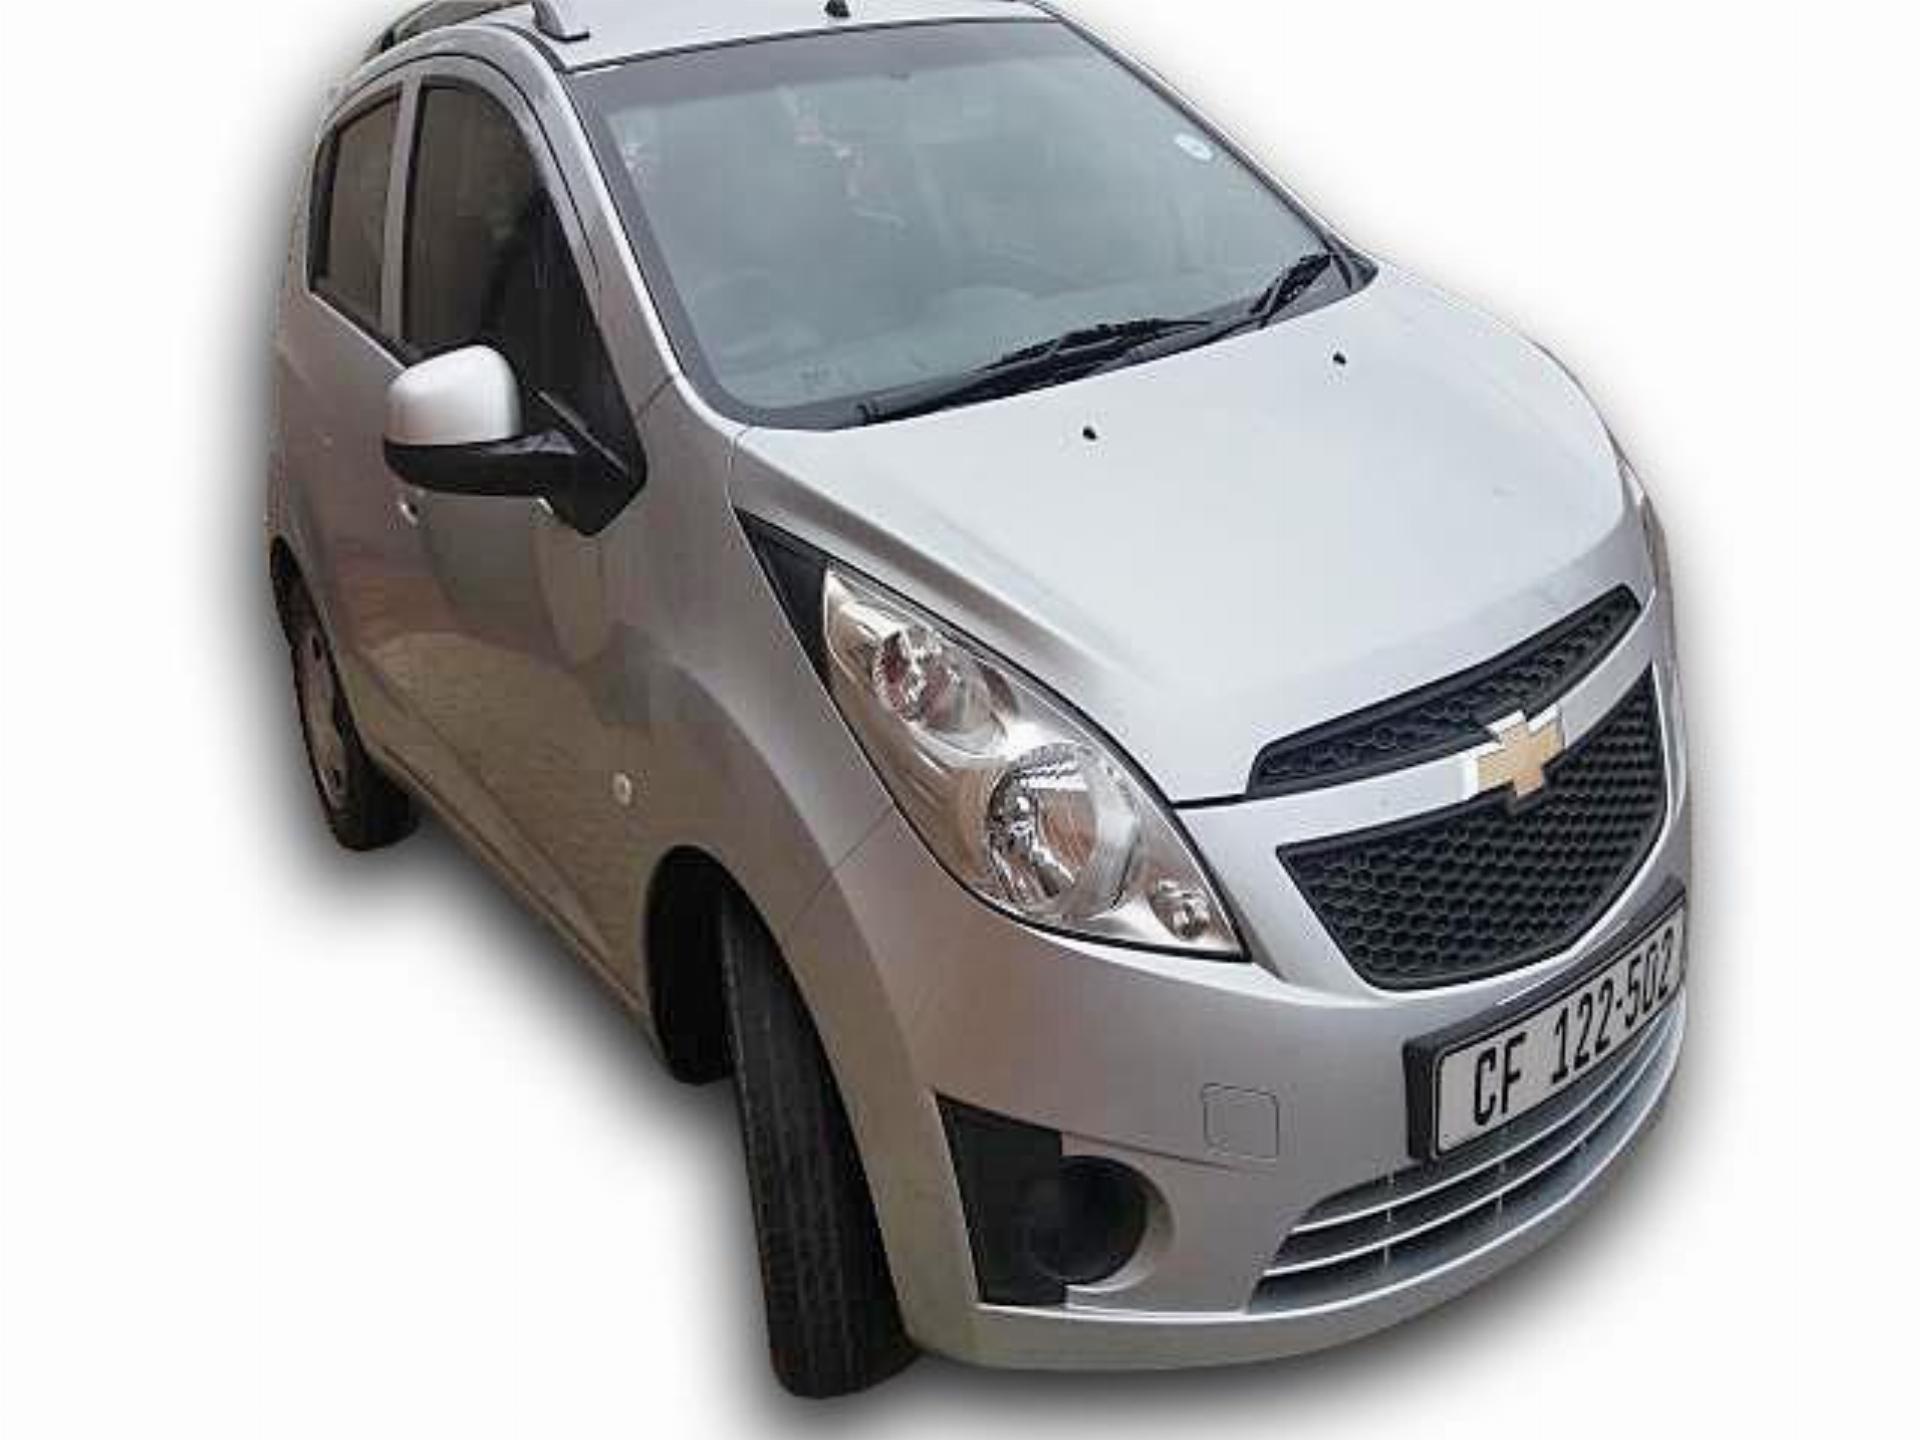 Used Chevrolet Spark 1.2 L 5DR 2012 on auction PV1020928